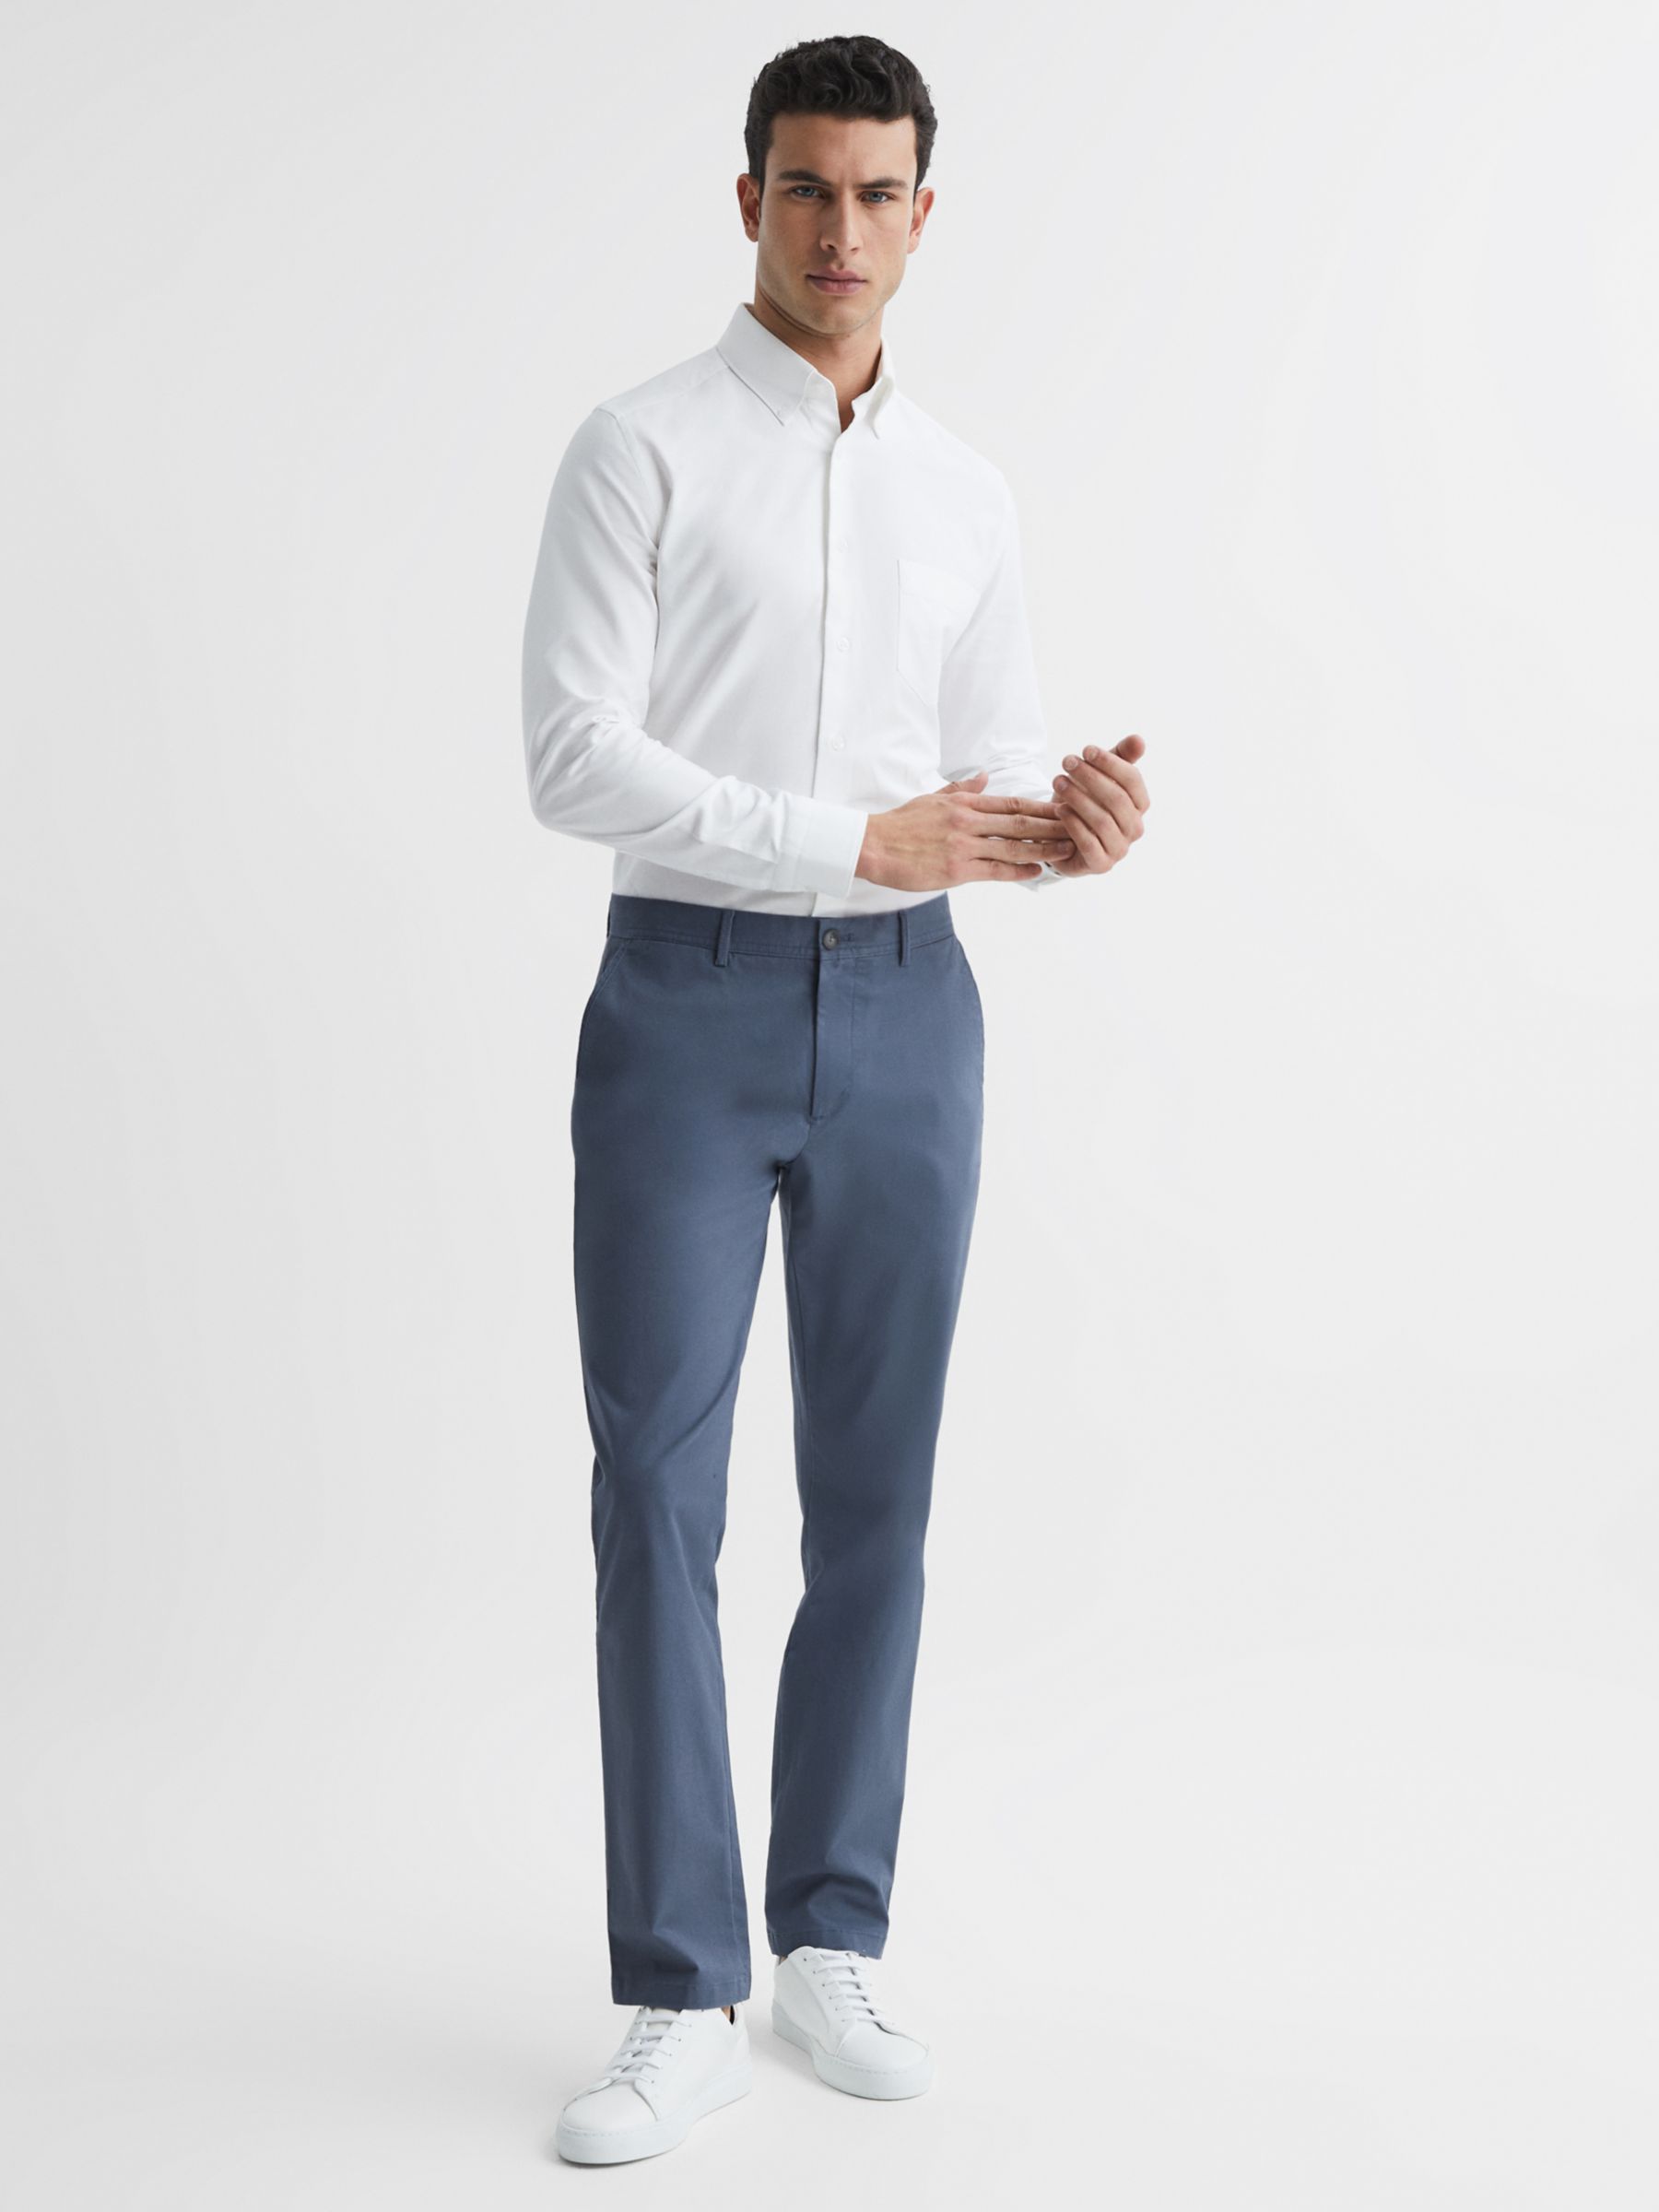 Buy Reiss Greenwich Long Sleeve Oxford Shirt, White Online at johnlewis.com